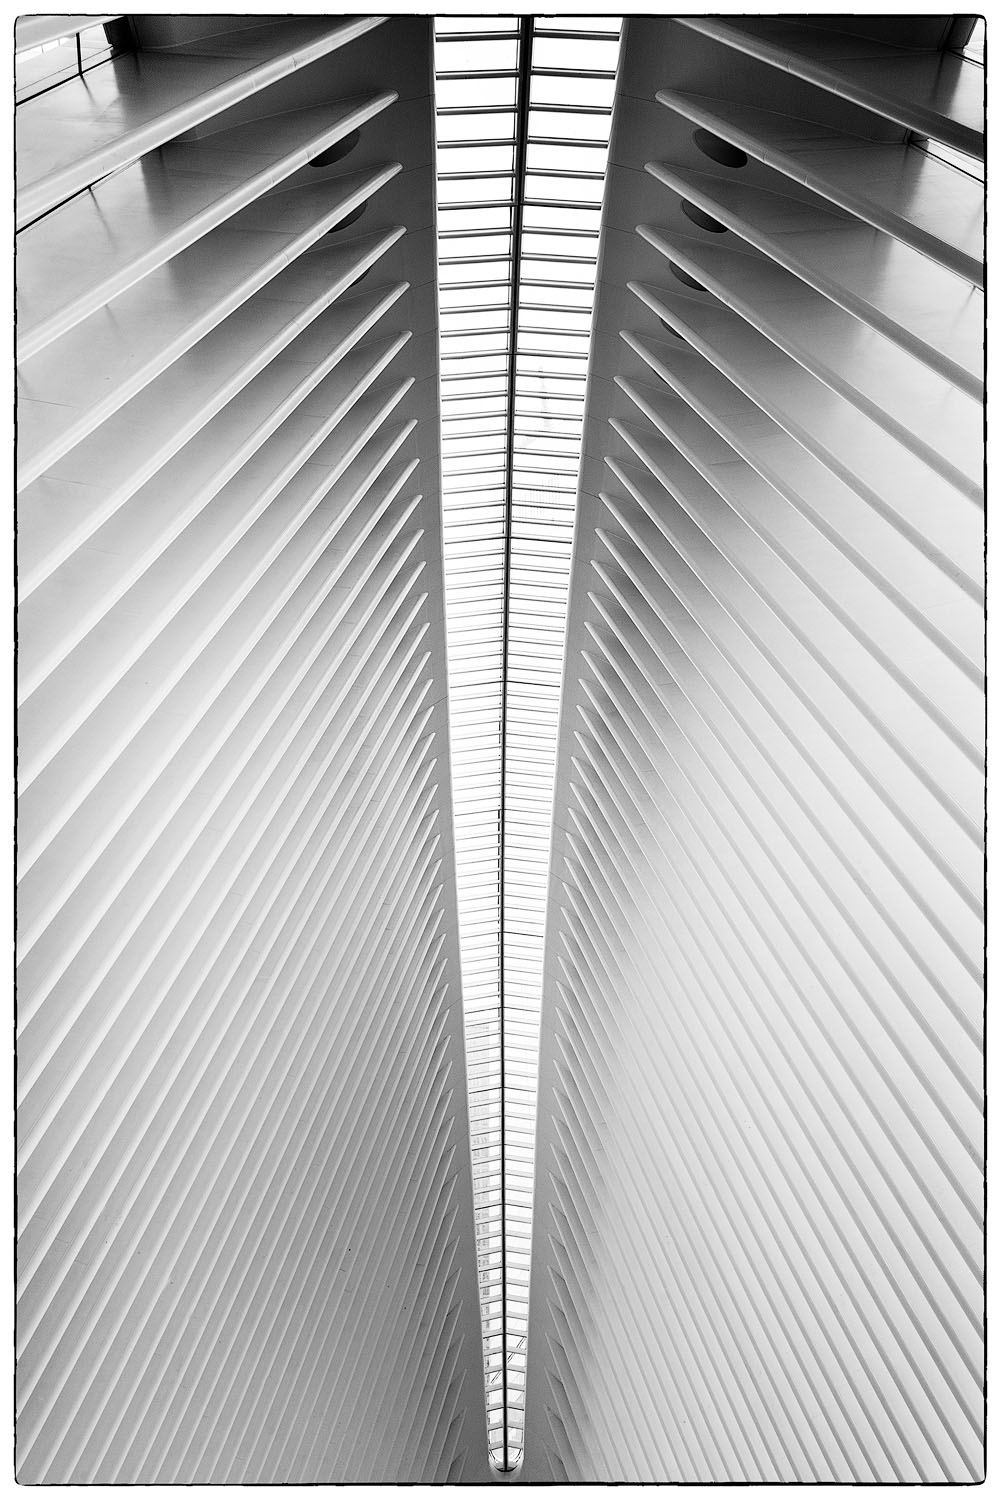 Architectural Photography Gallery - MARGEAUX FERREIRA